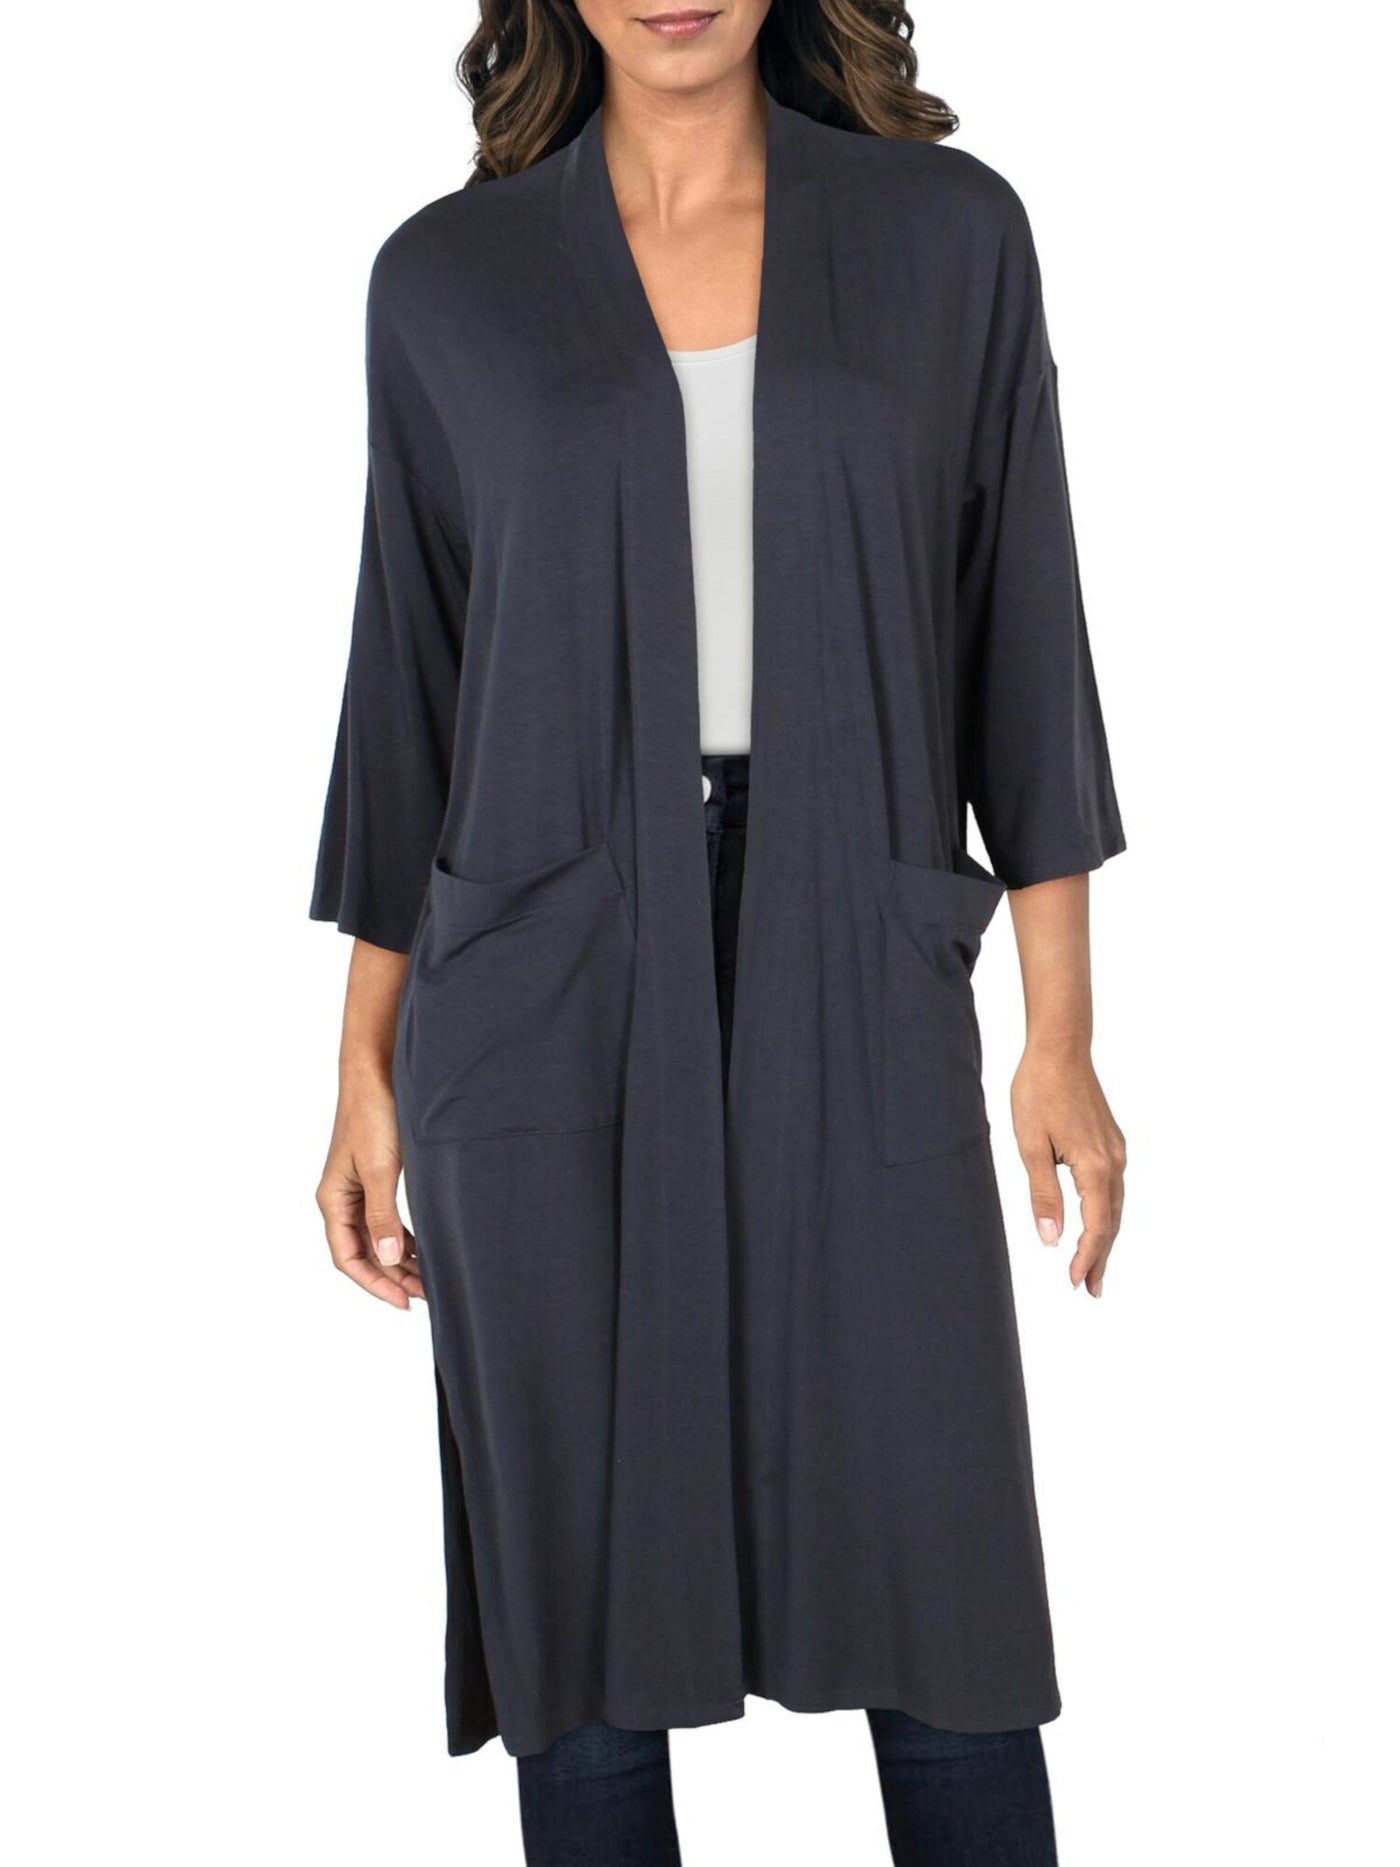 EILEEN FISHER Womens Navy Pocketed Side Slits Duster Elbow Sleeve Open Cardigan Sweater S